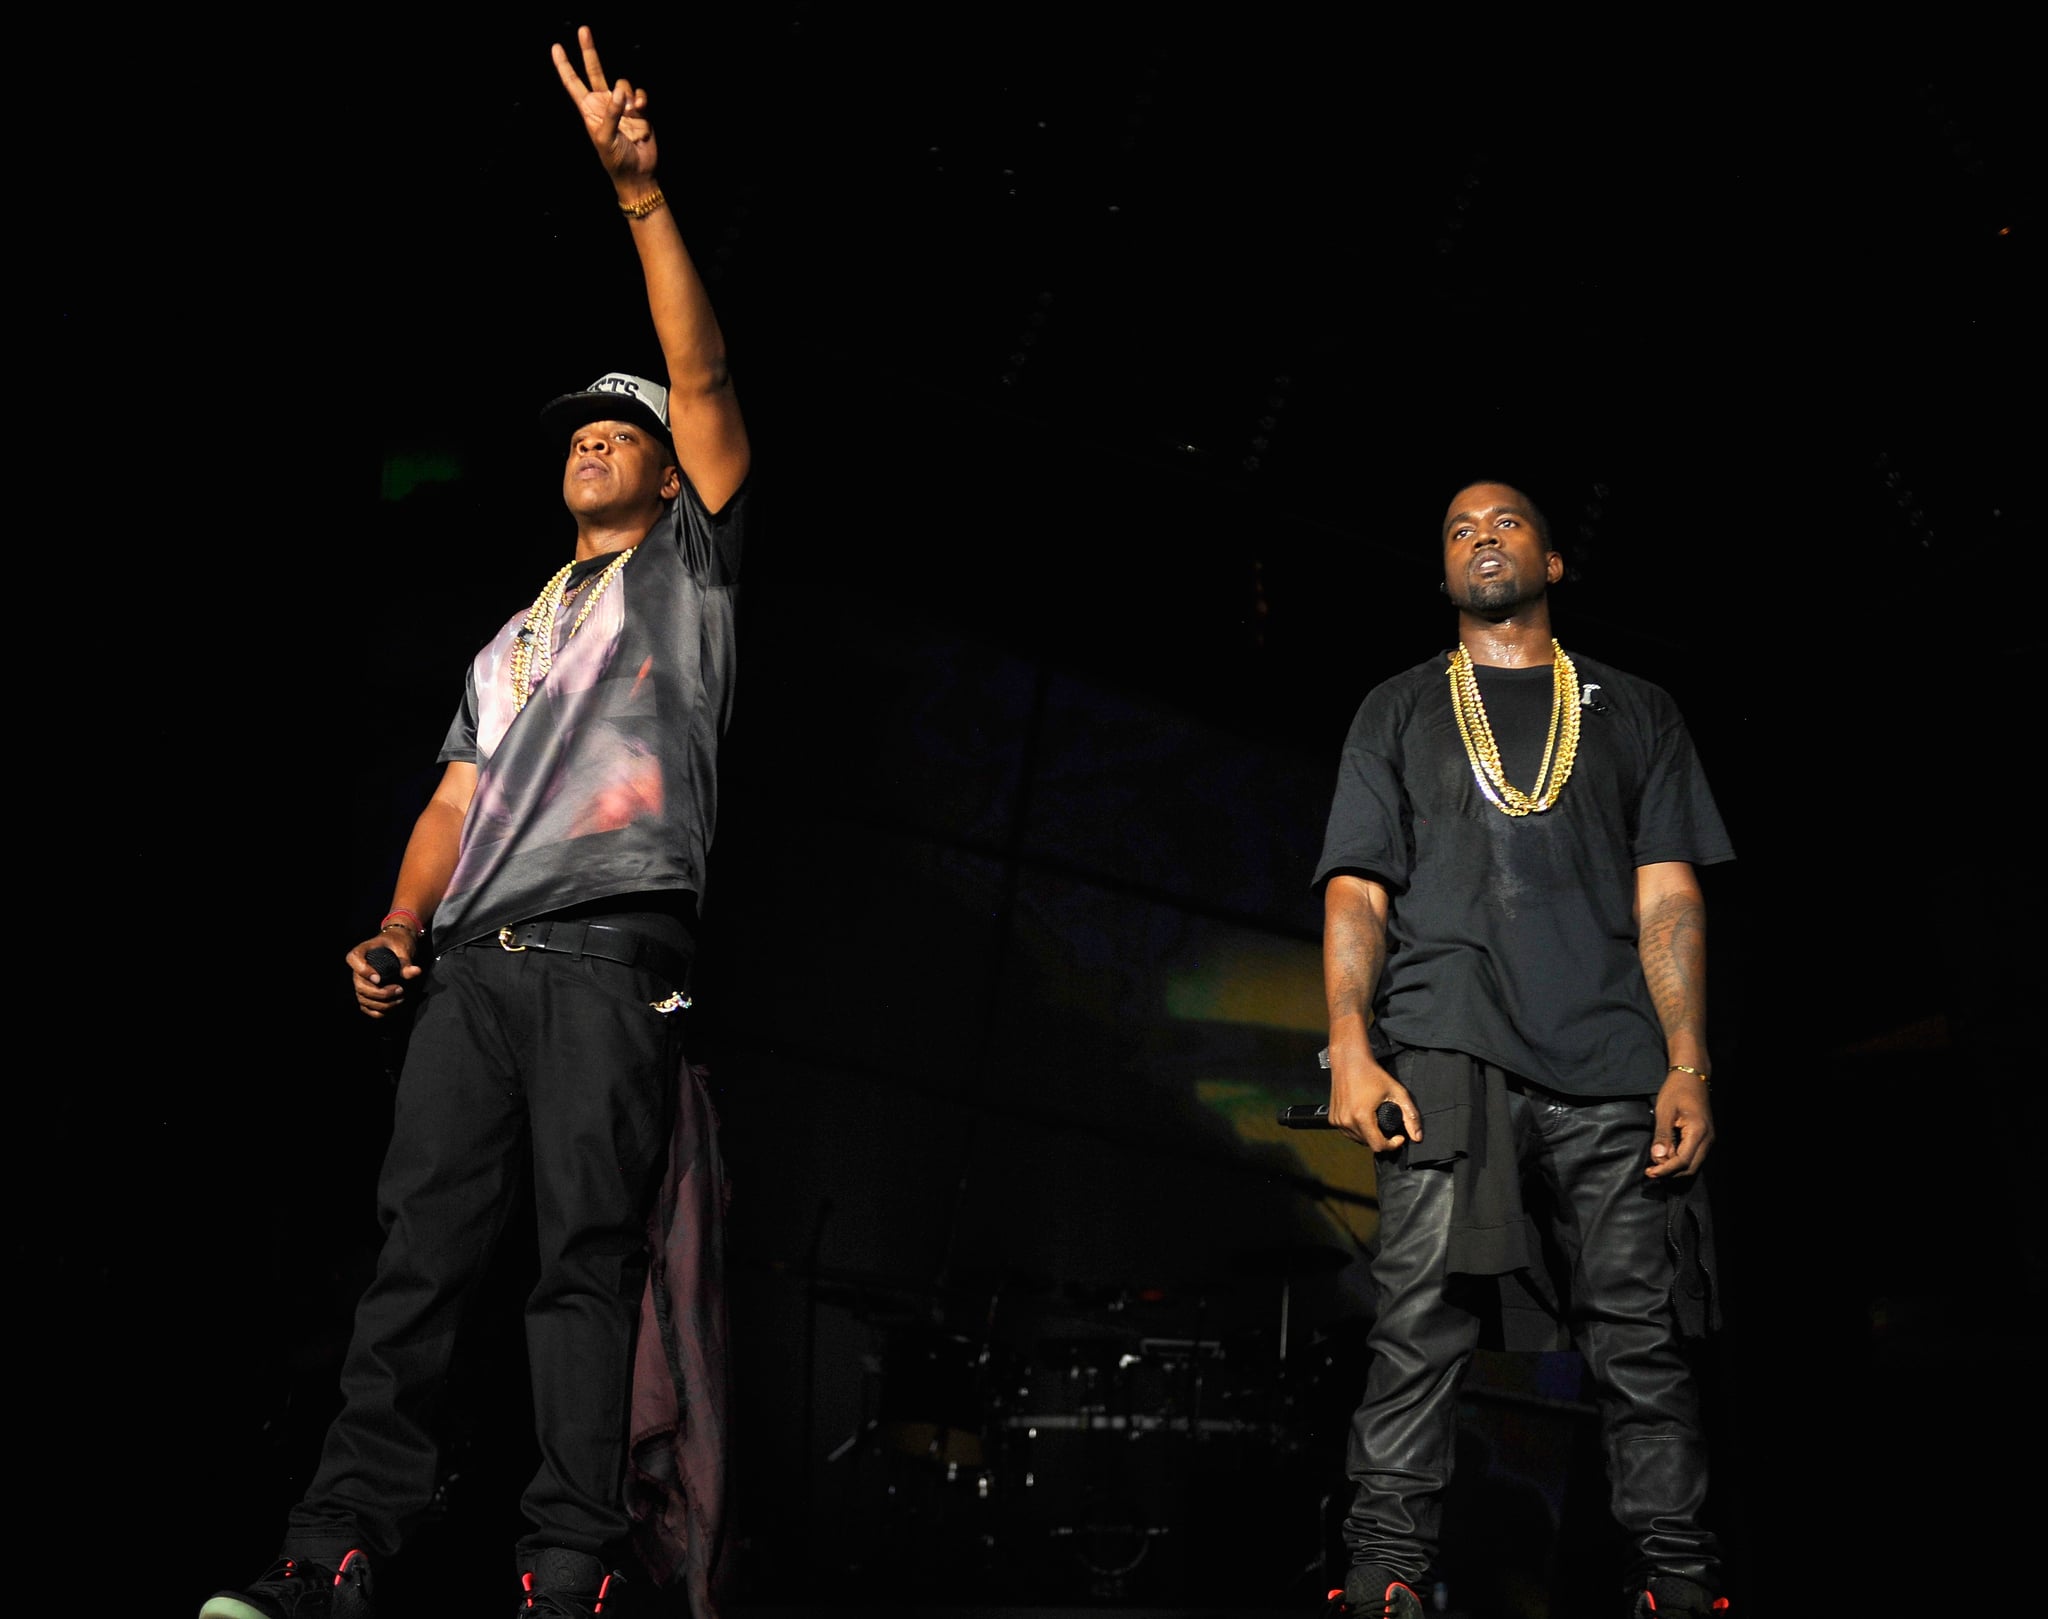 PHILADELPHIA, PA - SEPTEMBER 01:  Jay-Z and Kanye West perform during the Budweiser Made In America Festival Benefiting The United Way - Day 1 at Benjamin Franklin Parkway on September 1, 2012 in Philadelphia, Pennsylvania.  (Photo by Kevin Mazur/WireImage)